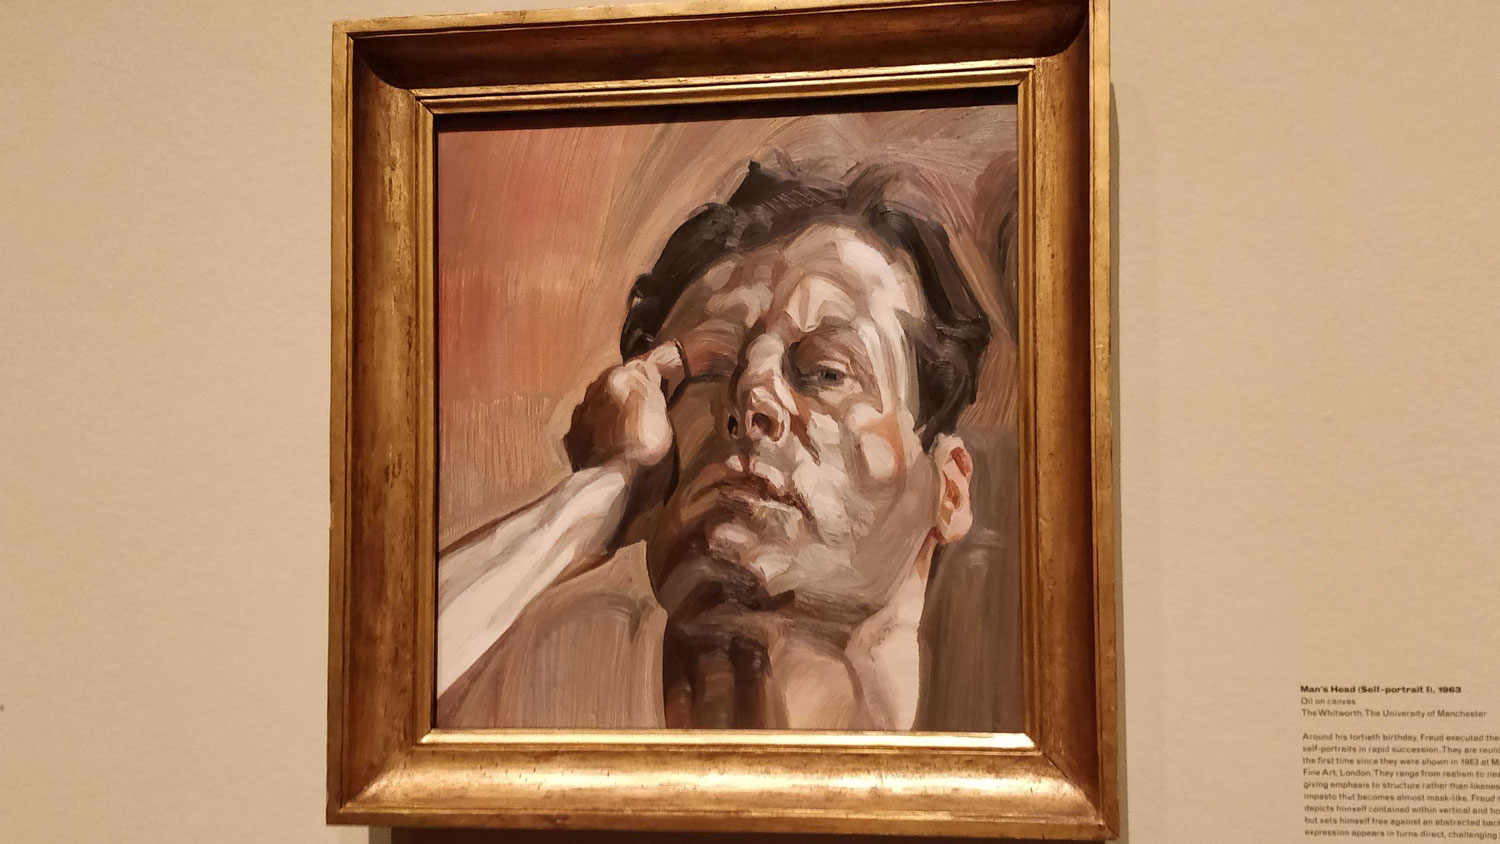 Lucian Freud: The Self-portraits at Royal Academy